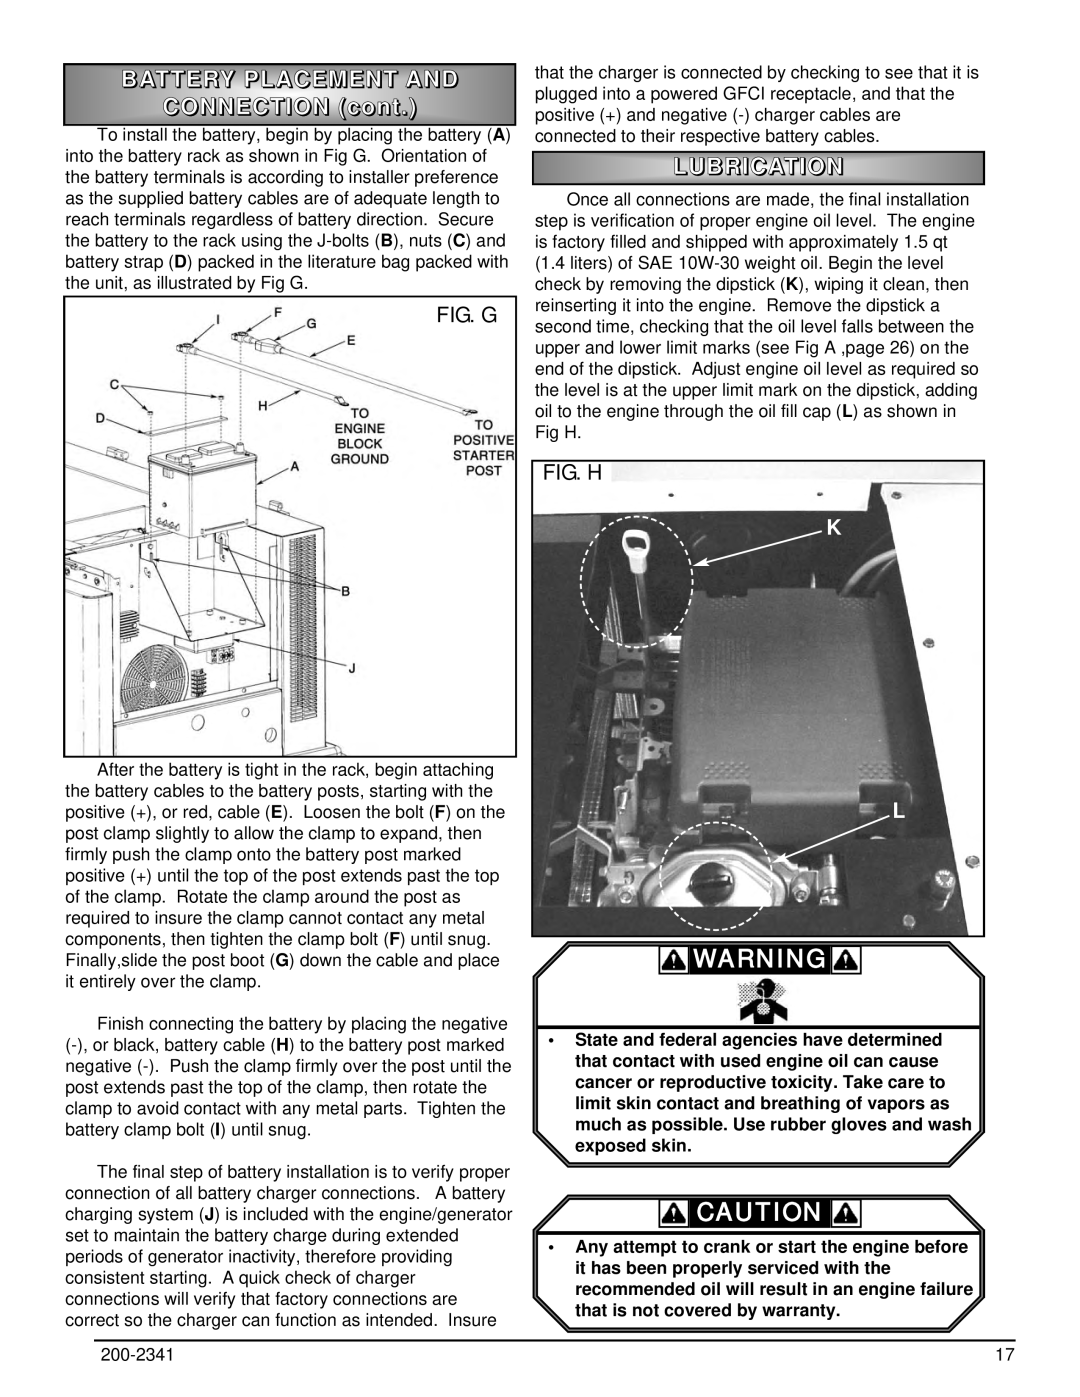 Powermate PM400911 owner manual Battery Placement And, CONNECTION cont, Lubrication 